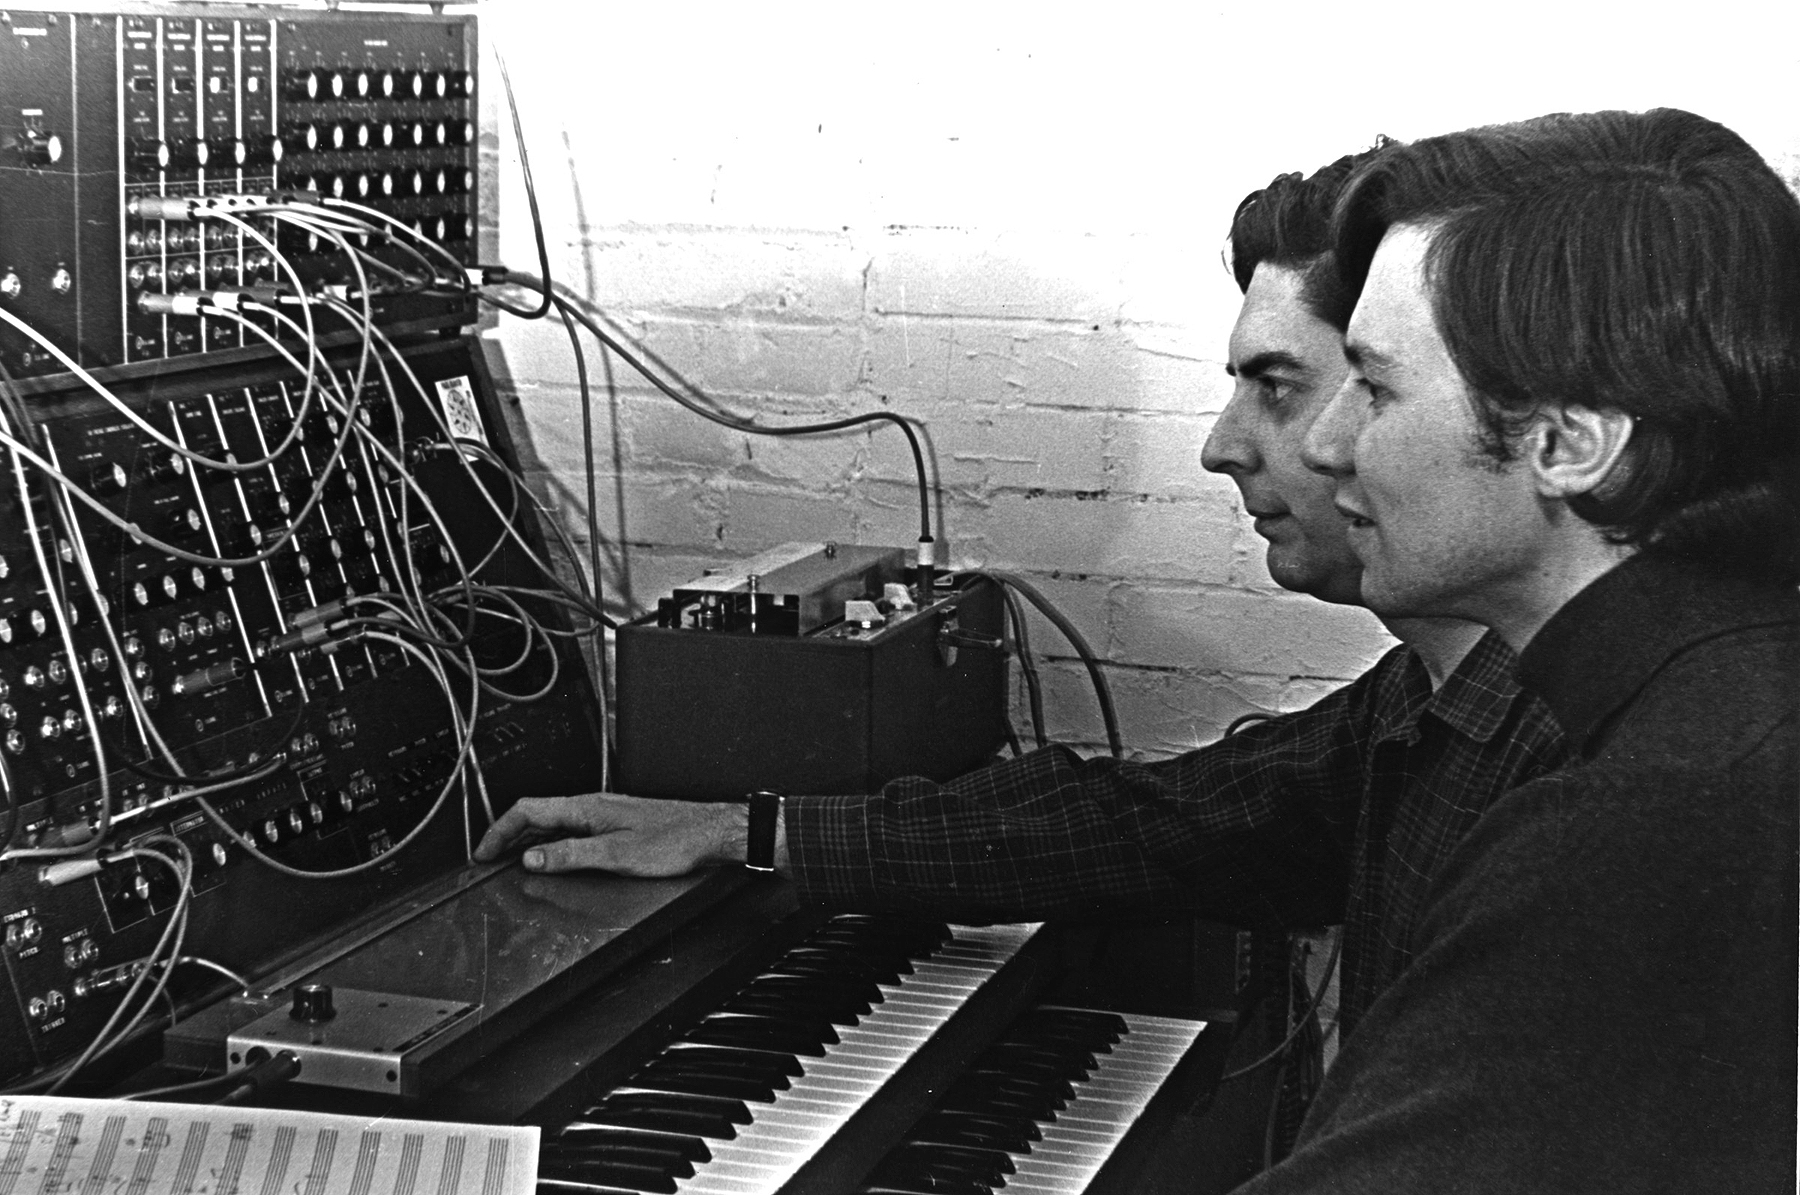 Bernie Krause and his creative partner, Paul Beaver, were key players in introducing the Moog synthesizer to pop music in the late 1960s.